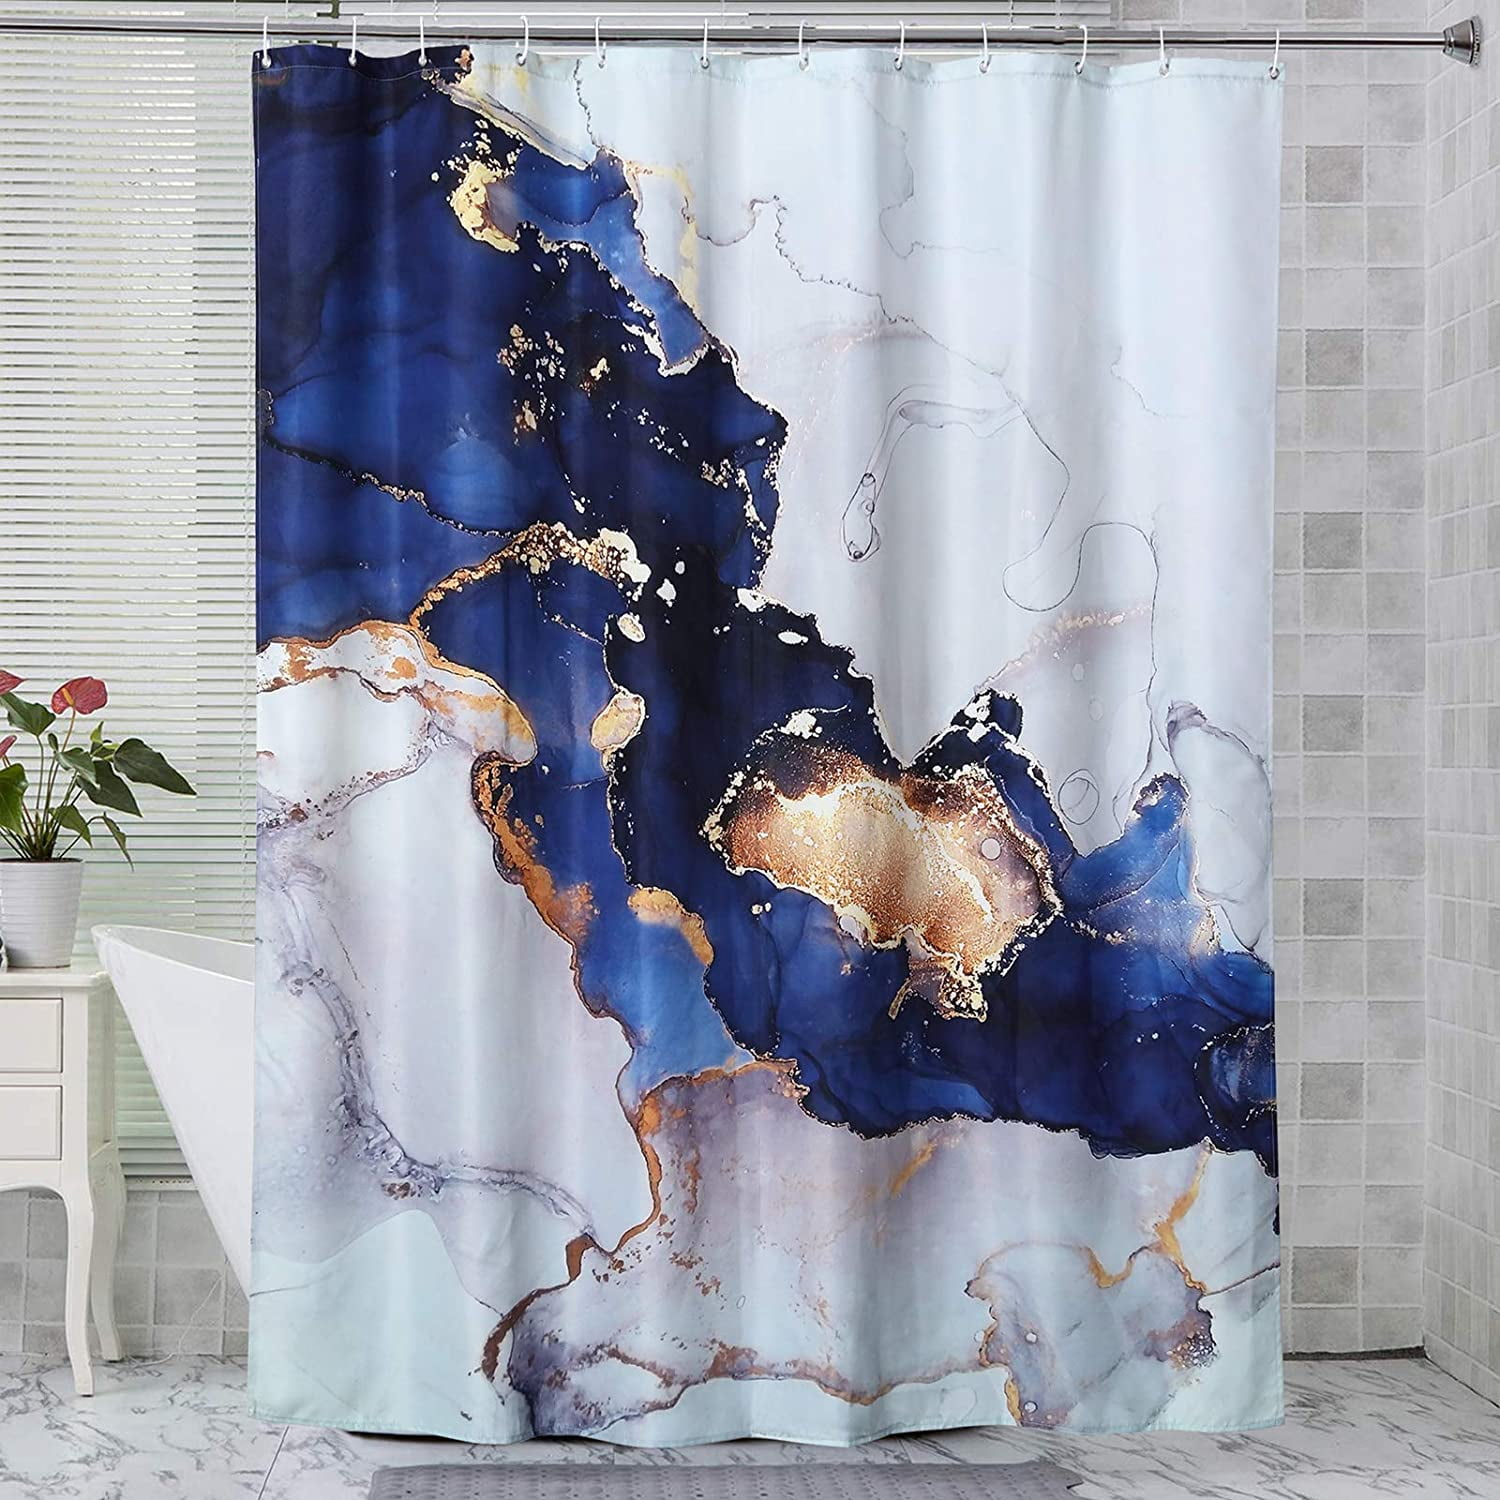 Marble Texture Shower Curtain Set Gold, Blue And White Marble Shower Curtain